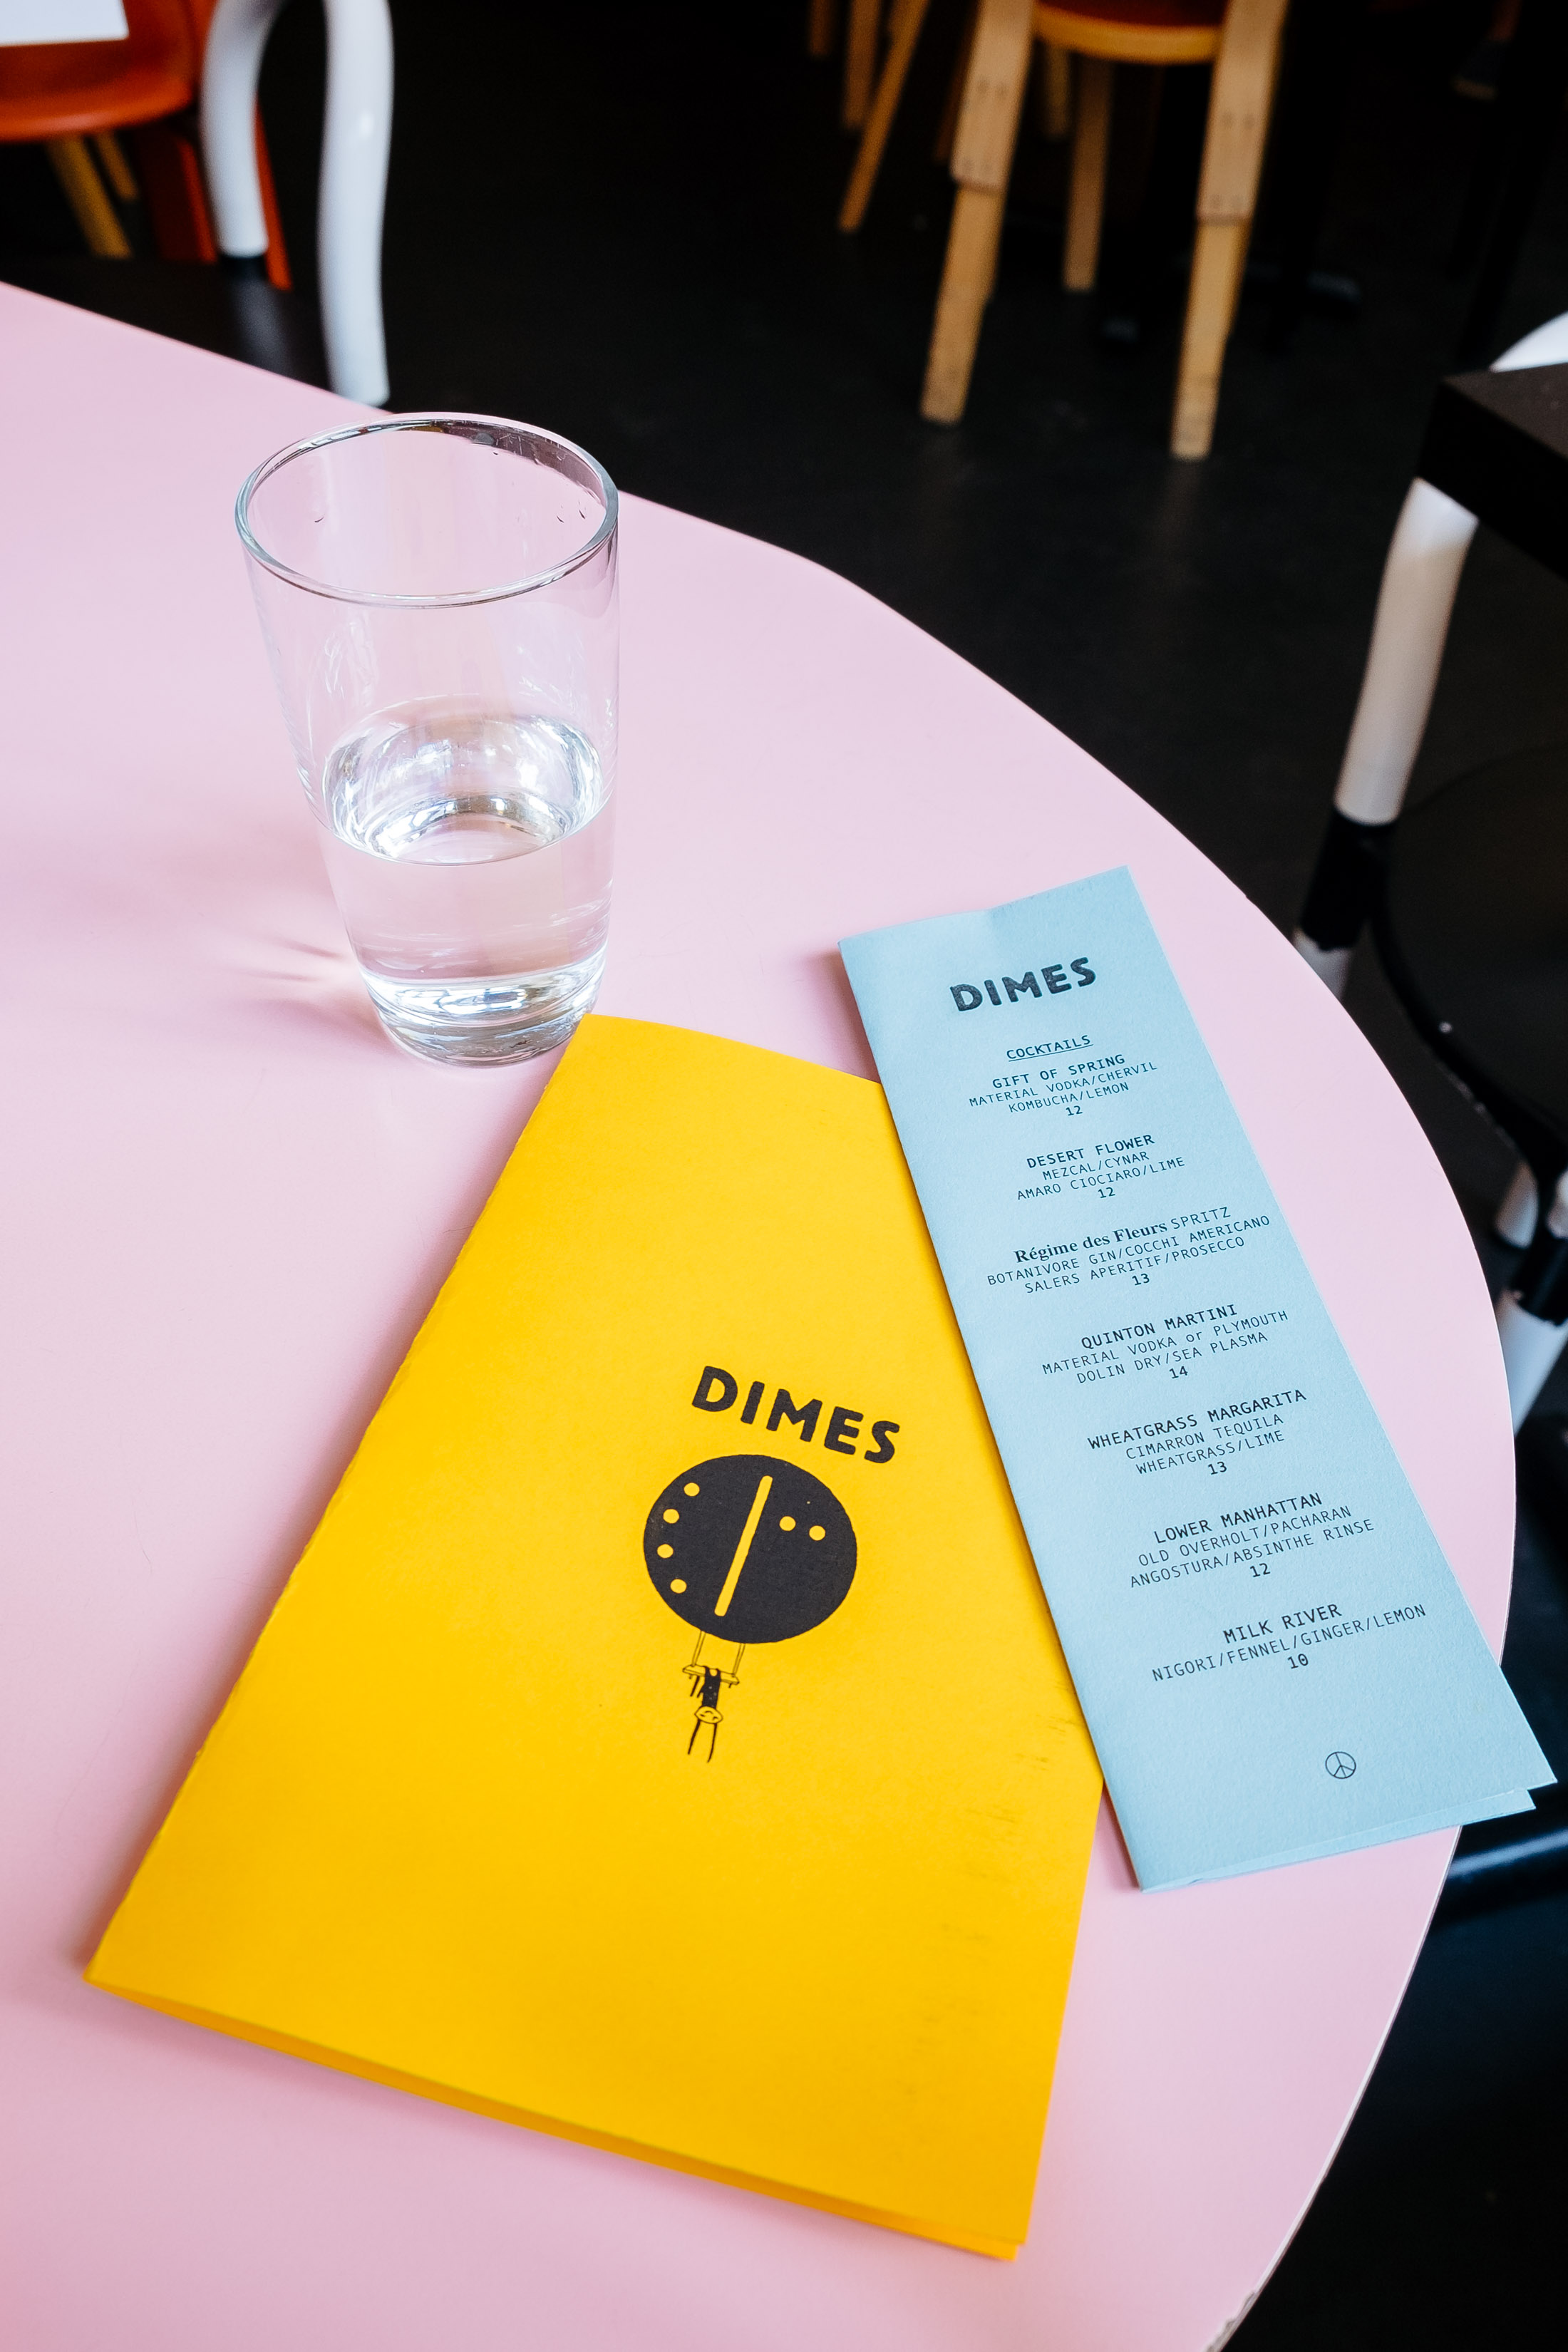 One of the pink tables at Dimes restaurant in Chinatown, New York